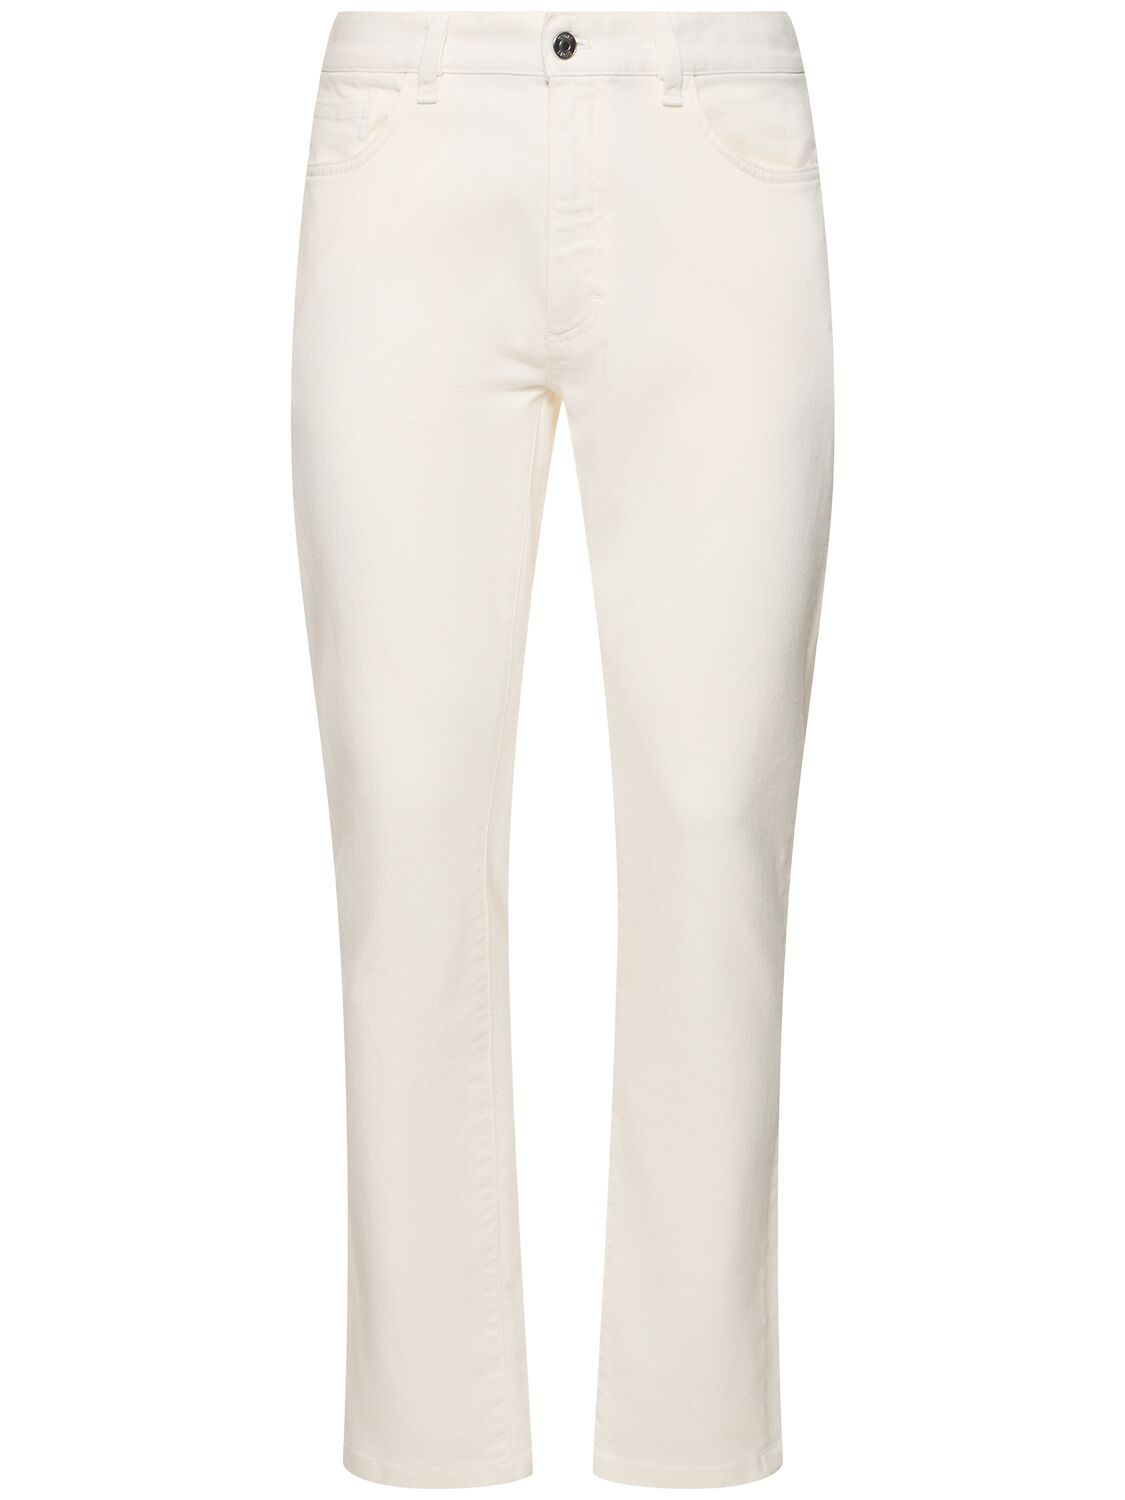 Zegna Five Pocket Cotton Pants In White